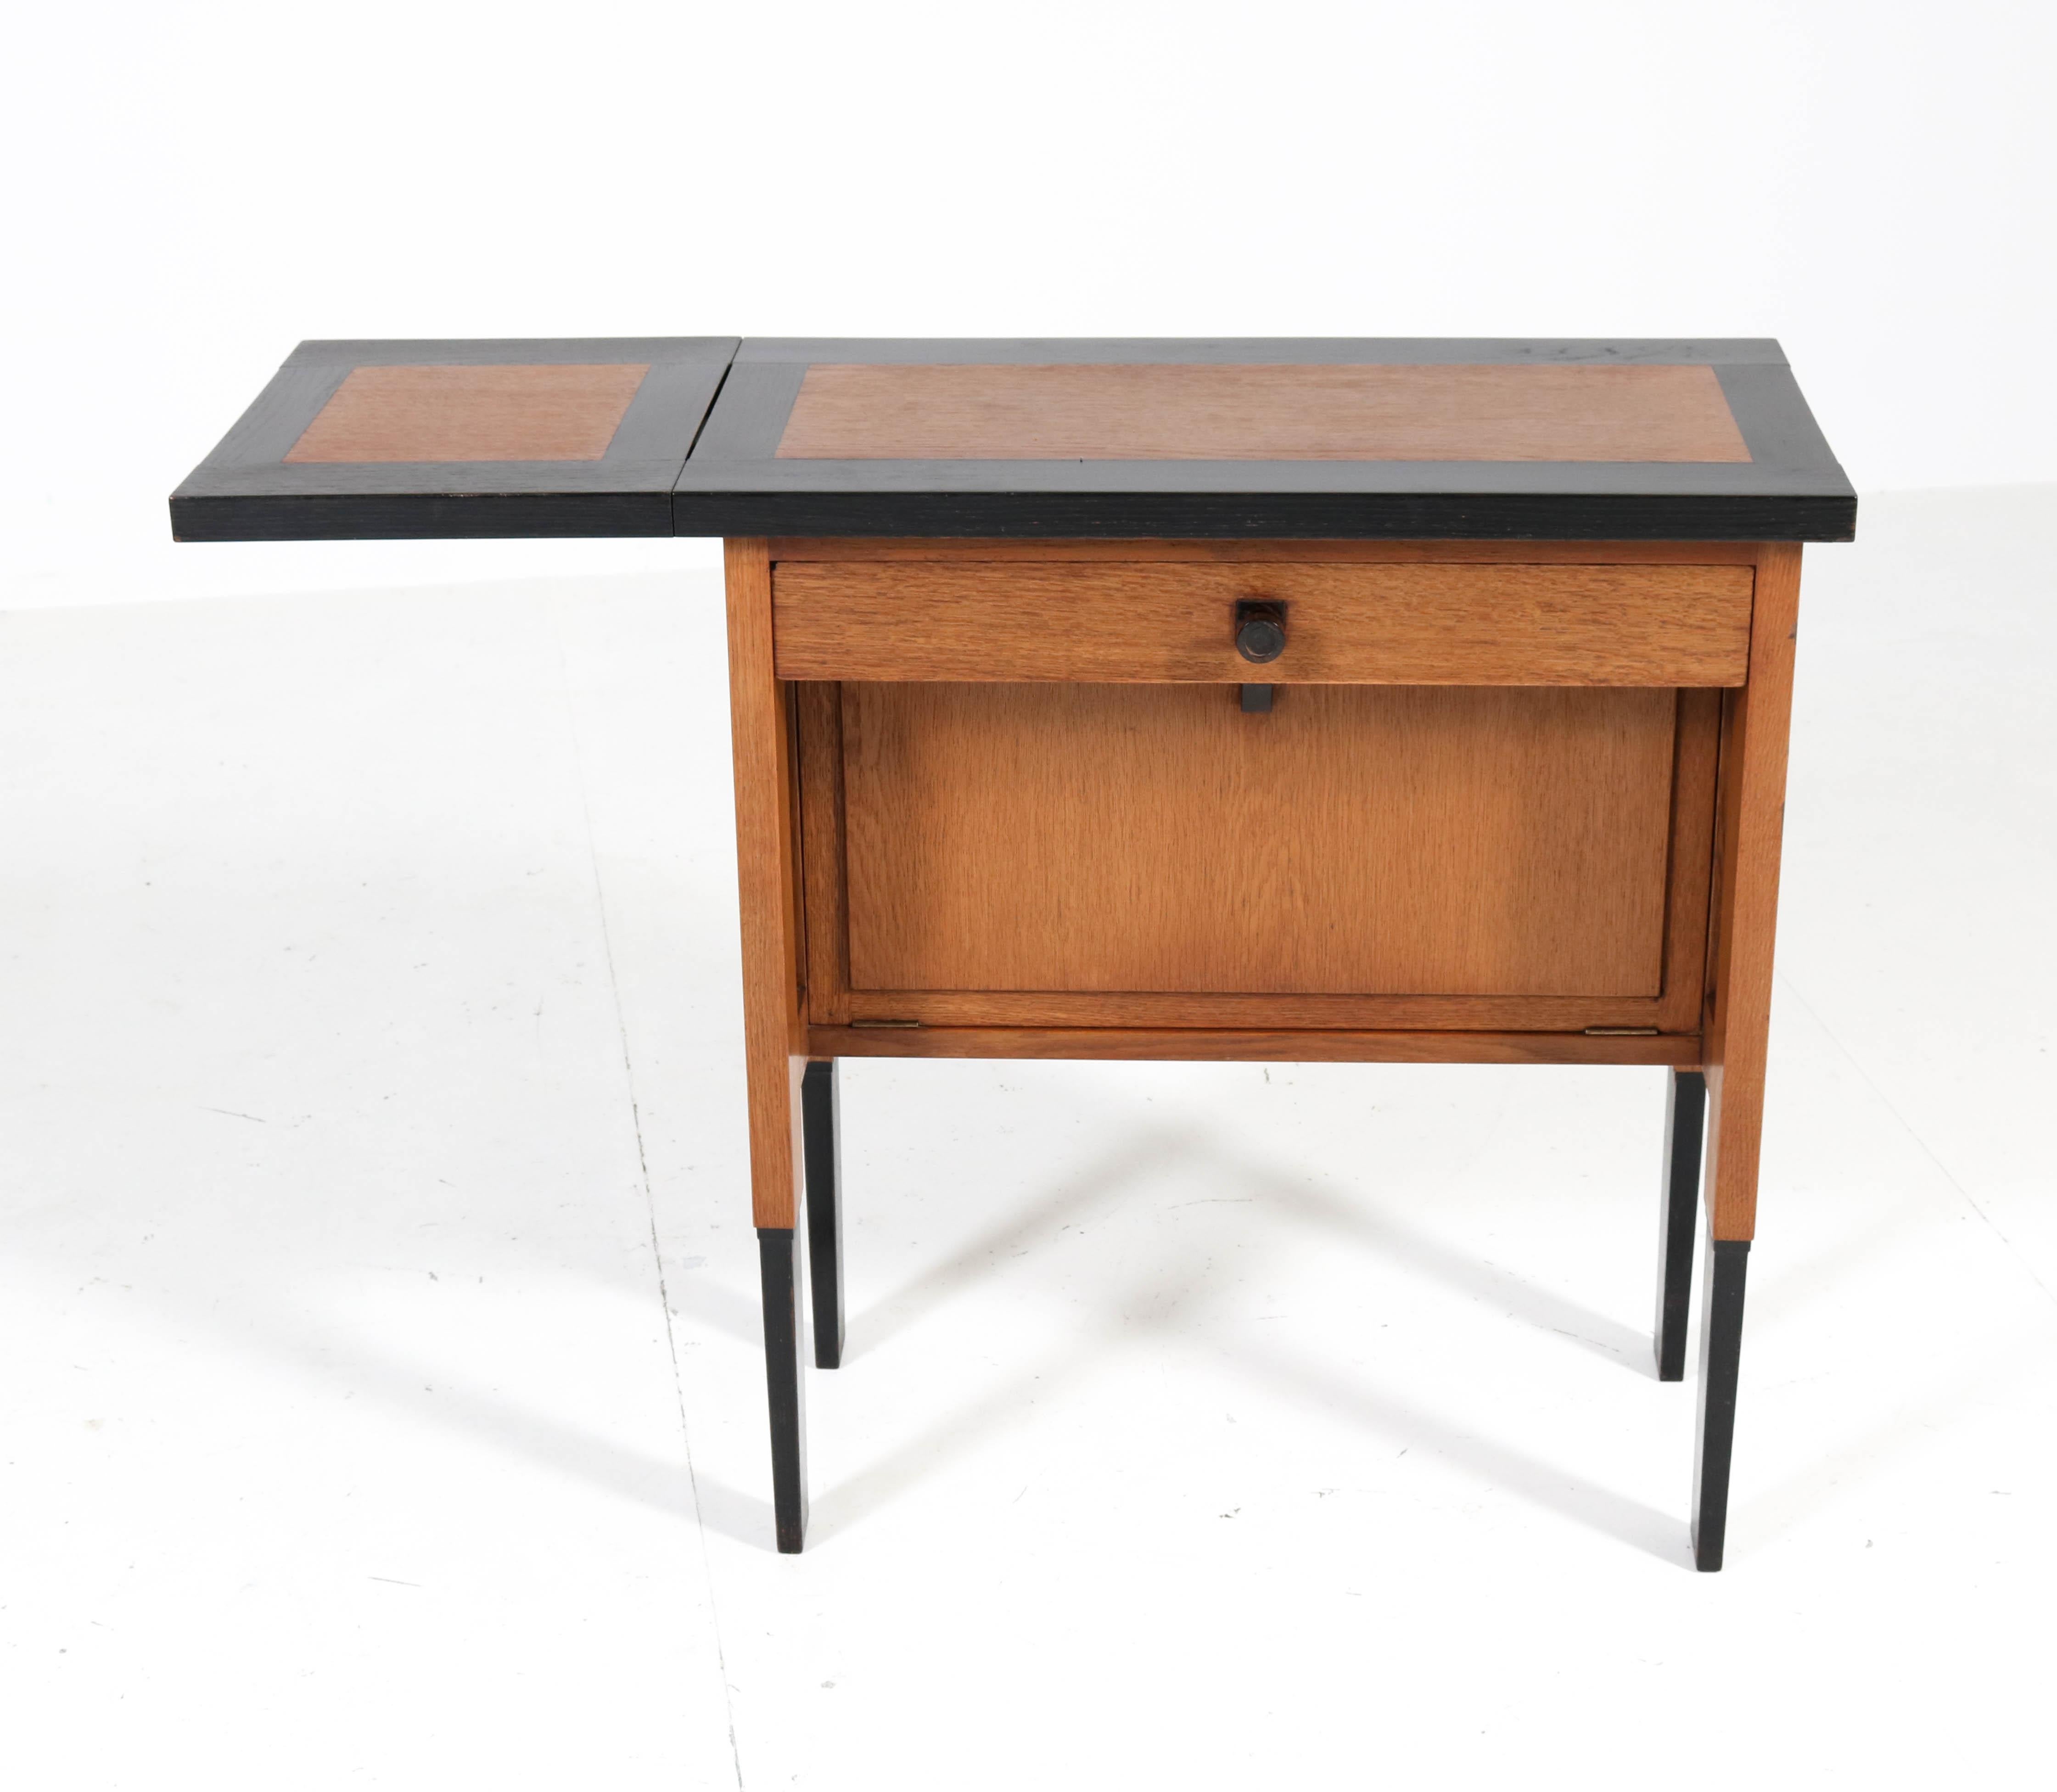 Magnificent and very rare Art Deco Haagse school cabinet or serving table.
Design by H. Fels for L.O.V. Oosterbeek.
Striking Dutch design from the twenties.
Oak with original black lacquered details.
Solid ebony Macassar knob and handle on the